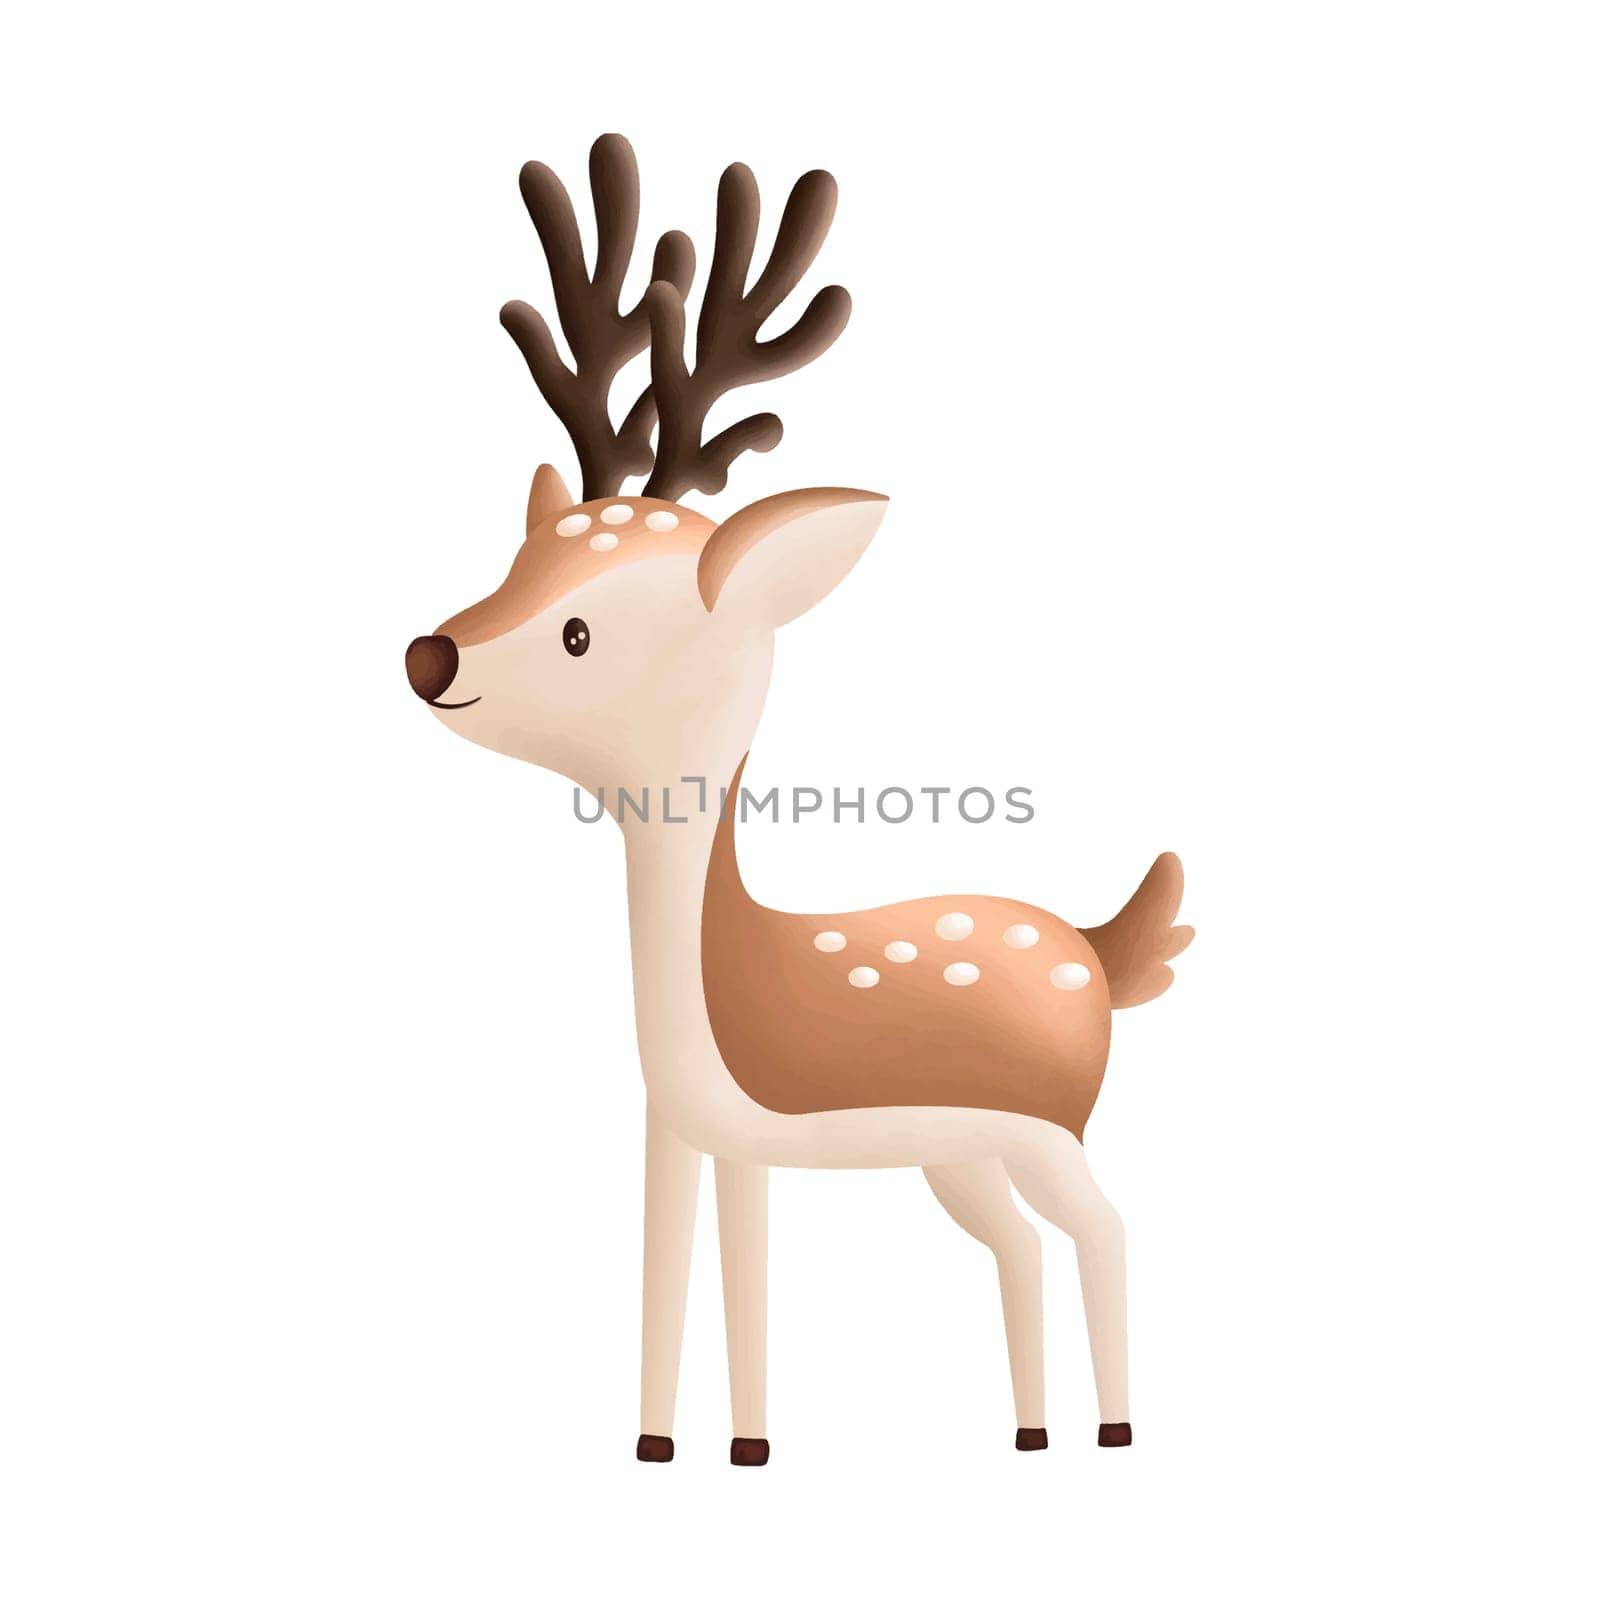 Adorable baby deer cute illustration isolated Clipart. Woodland Animal Clipart for baby shower design, planner sticker, pattern, background, invitations, greeting cards, sublimation.